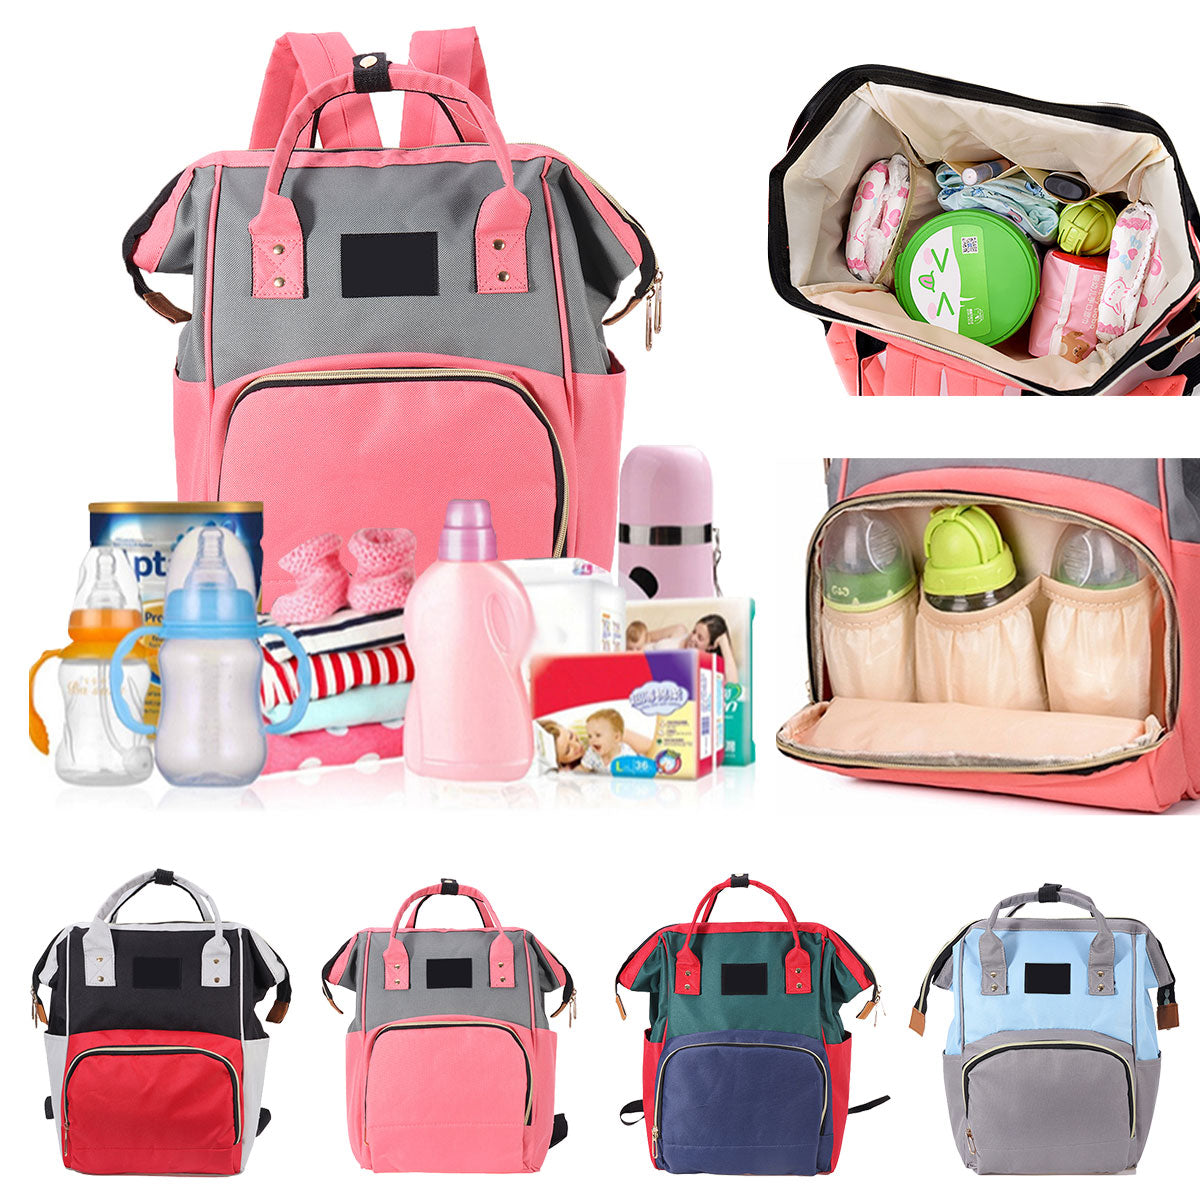 Fashion Baby Diaper Bags Large Capacity Nappy Bag